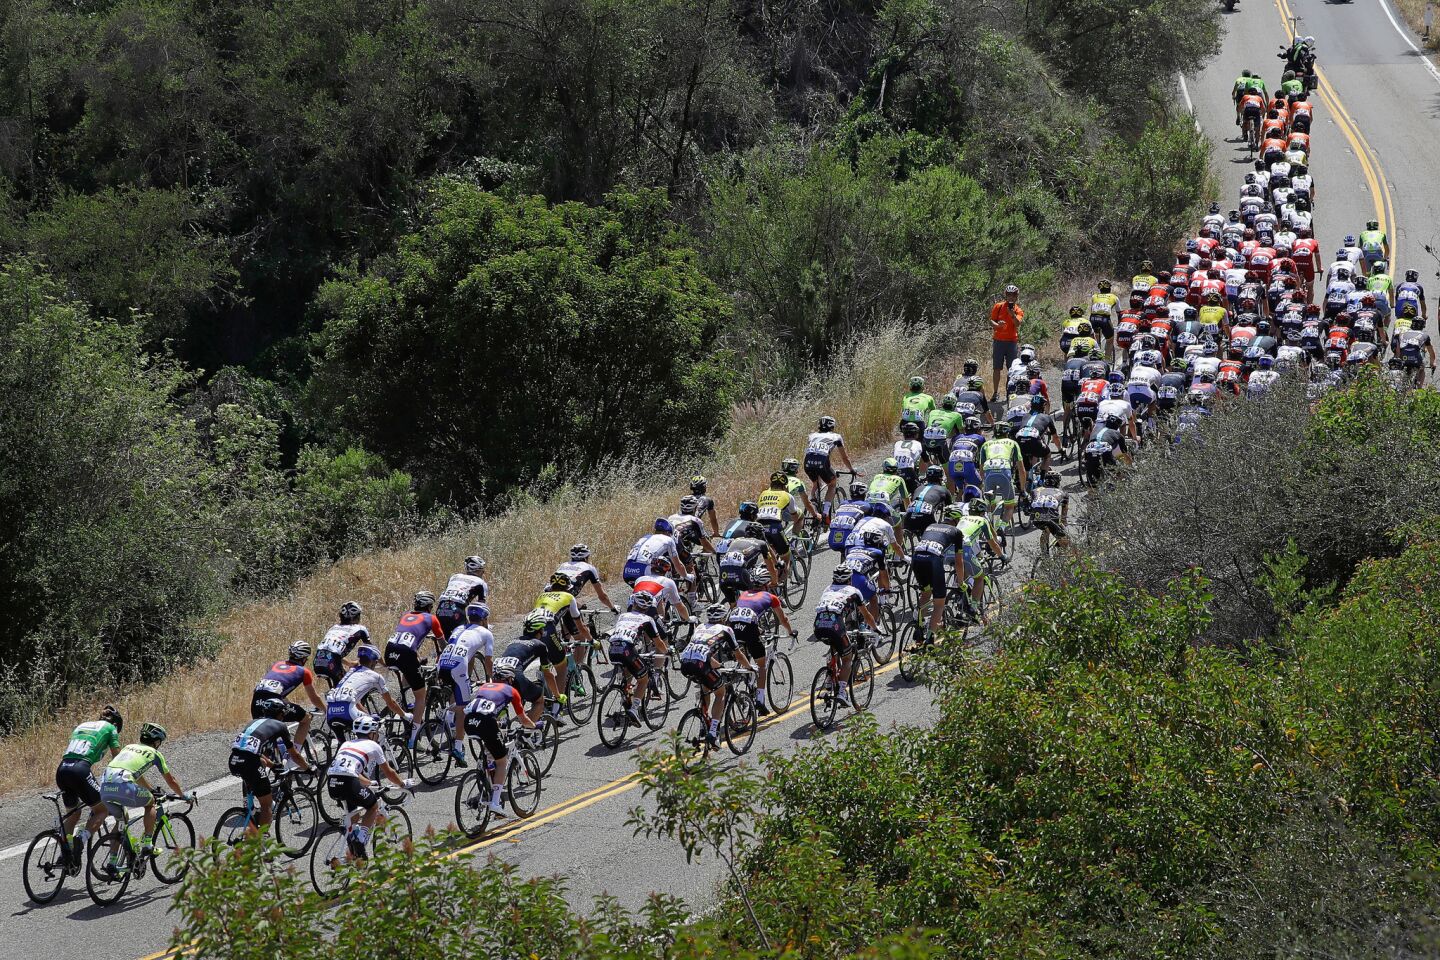 The peloton makes the climb along Casitas Pass Road during stage three of the Amgen Tour of California on May 17.